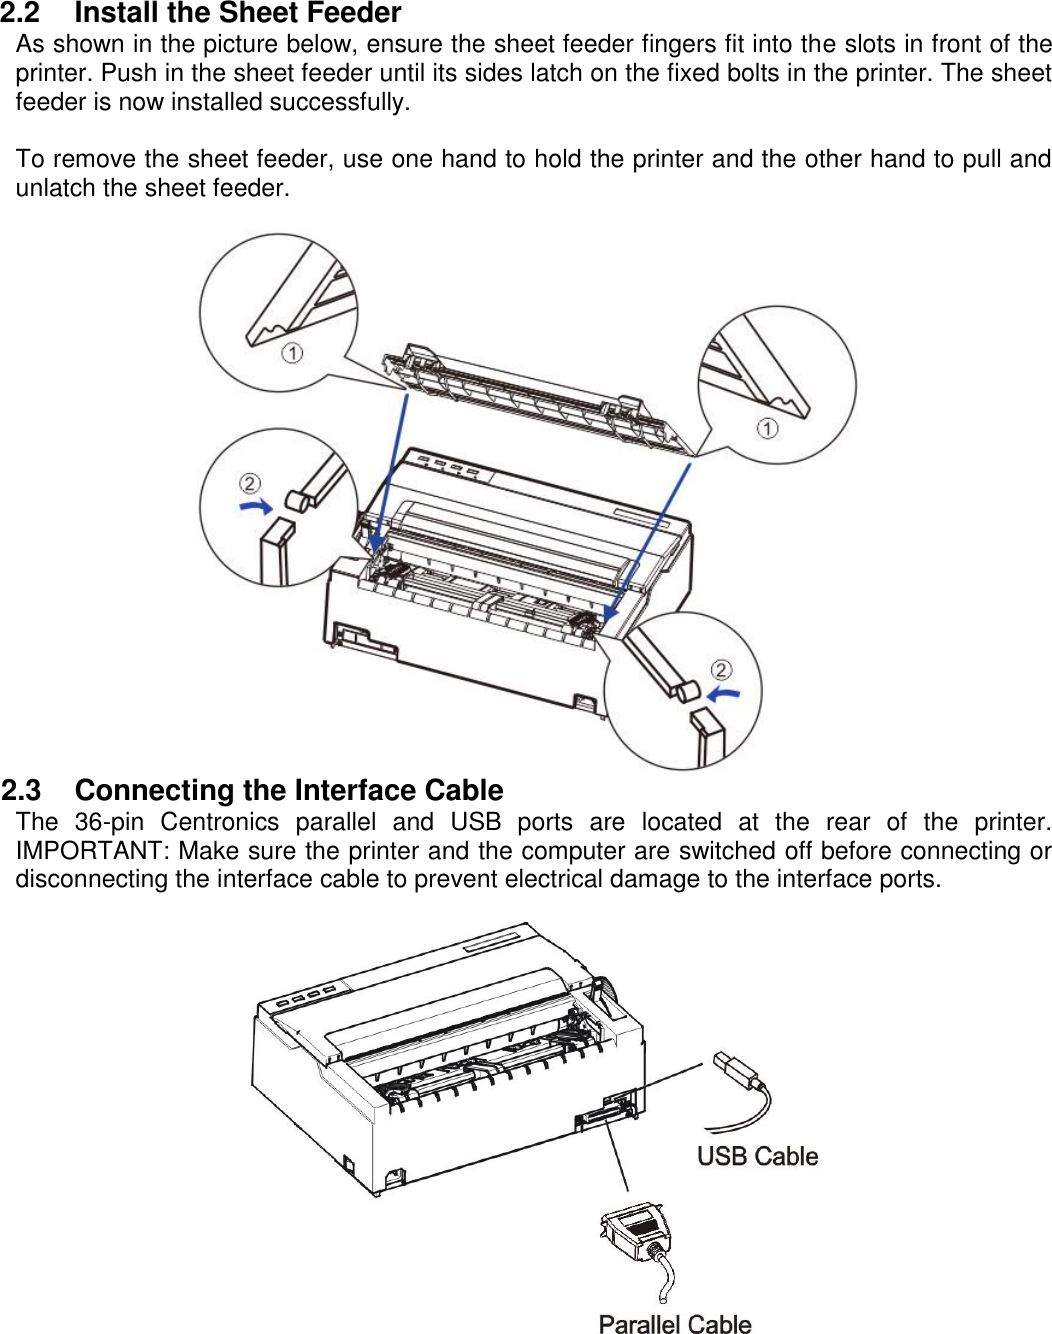     2.2  Install the Sheet Feeder As shown in the picture below, ensure the sheet feeder fingers fit into the slots in front of the printer. Push in the sheet feeder until its sides latch on the fixed bolts in the printer. The sheet feeder is now installed successfully.  To remove the sheet feeder, use one hand to hold the printer and the other hand to pull and unlatch the sheet feeder.   2.3  Connecting the Interface Cable The  36-pin  Centronics  parallel  and  USB  ports  are  located  at  the  rear  of  the  printer. IMPORTANT: Make sure the printer and the computer are switched off before connecting or disconnecting the interface cable to prevent electrical damage to the interface ports.   